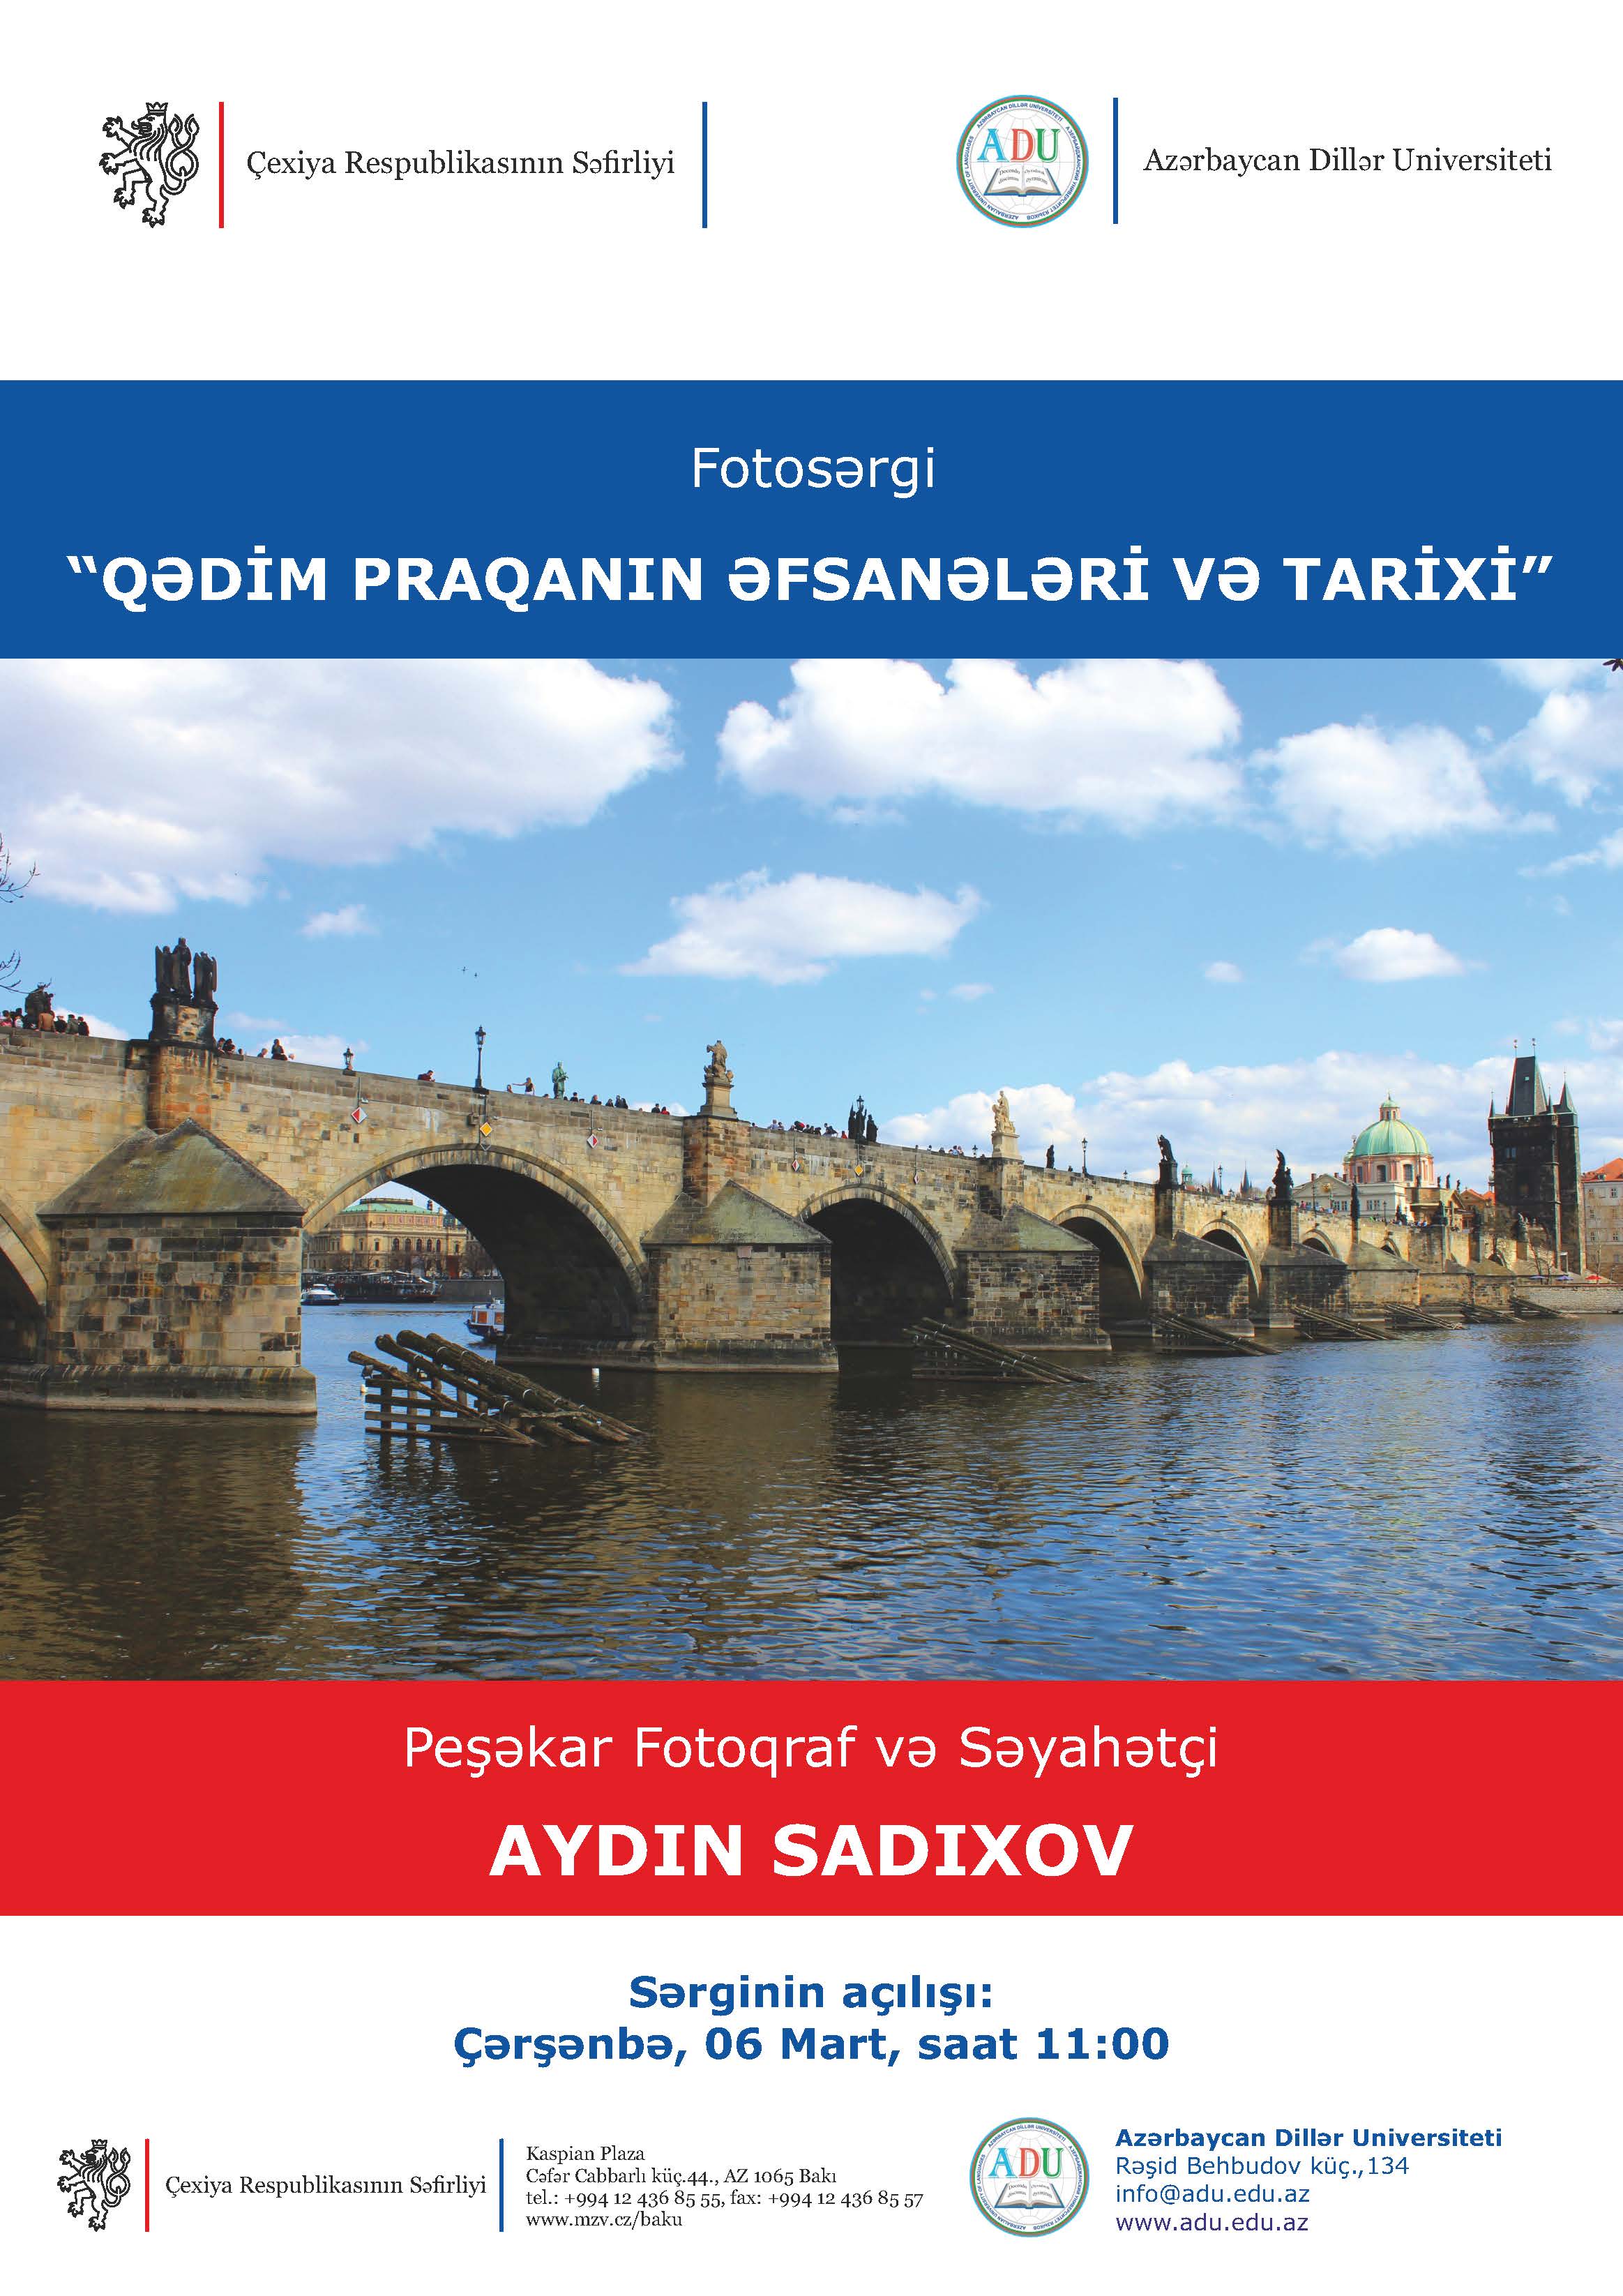 The opening ceremony of photography exhibition "Legends and history of old Prague" will be held at Azerbaijan University of Languages